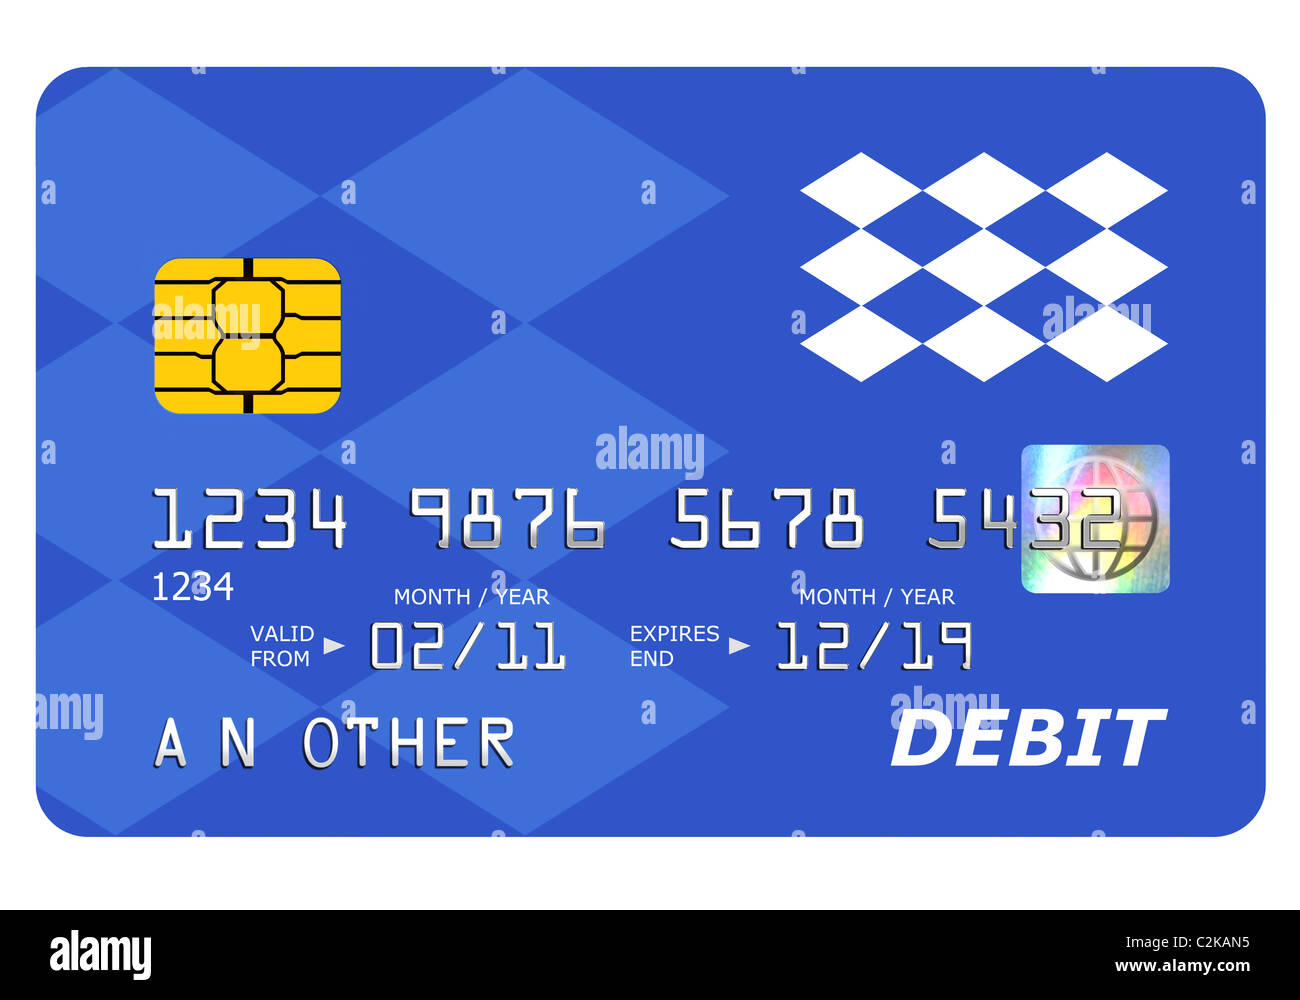 Everything on this mock debit card including the hologram has been designed by myself, the number and name is generic. Stock Photo